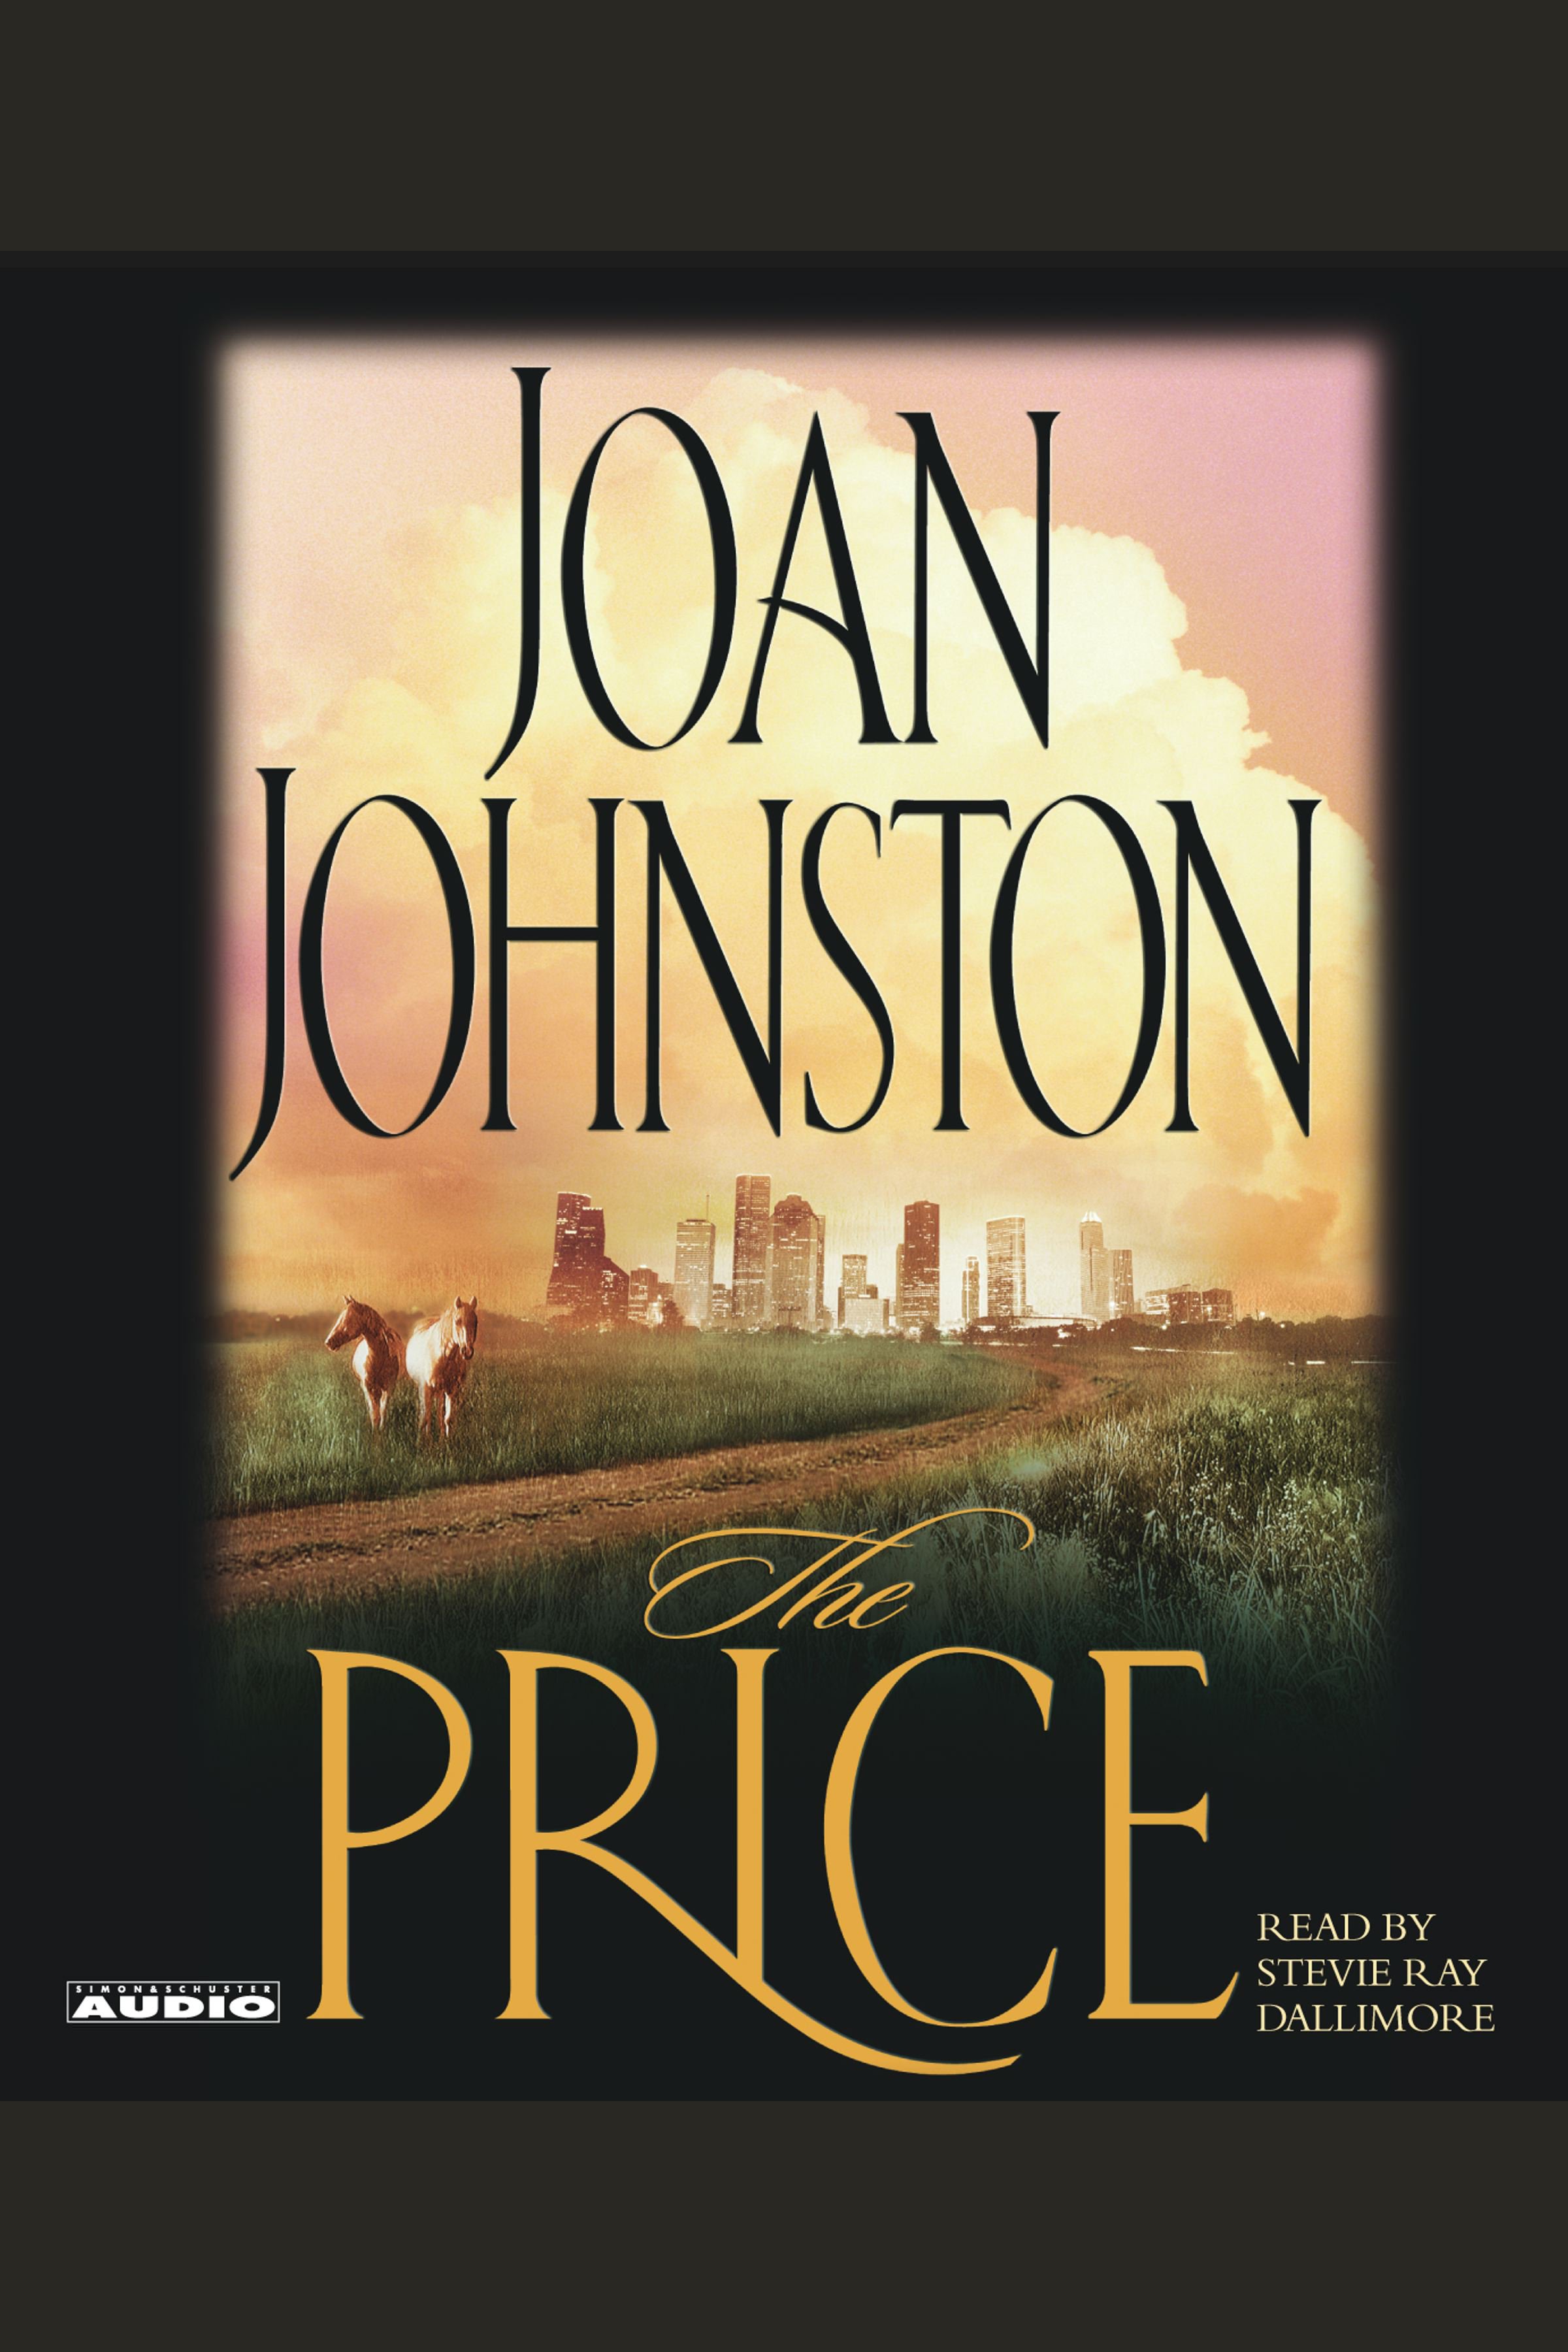 The Price cover image